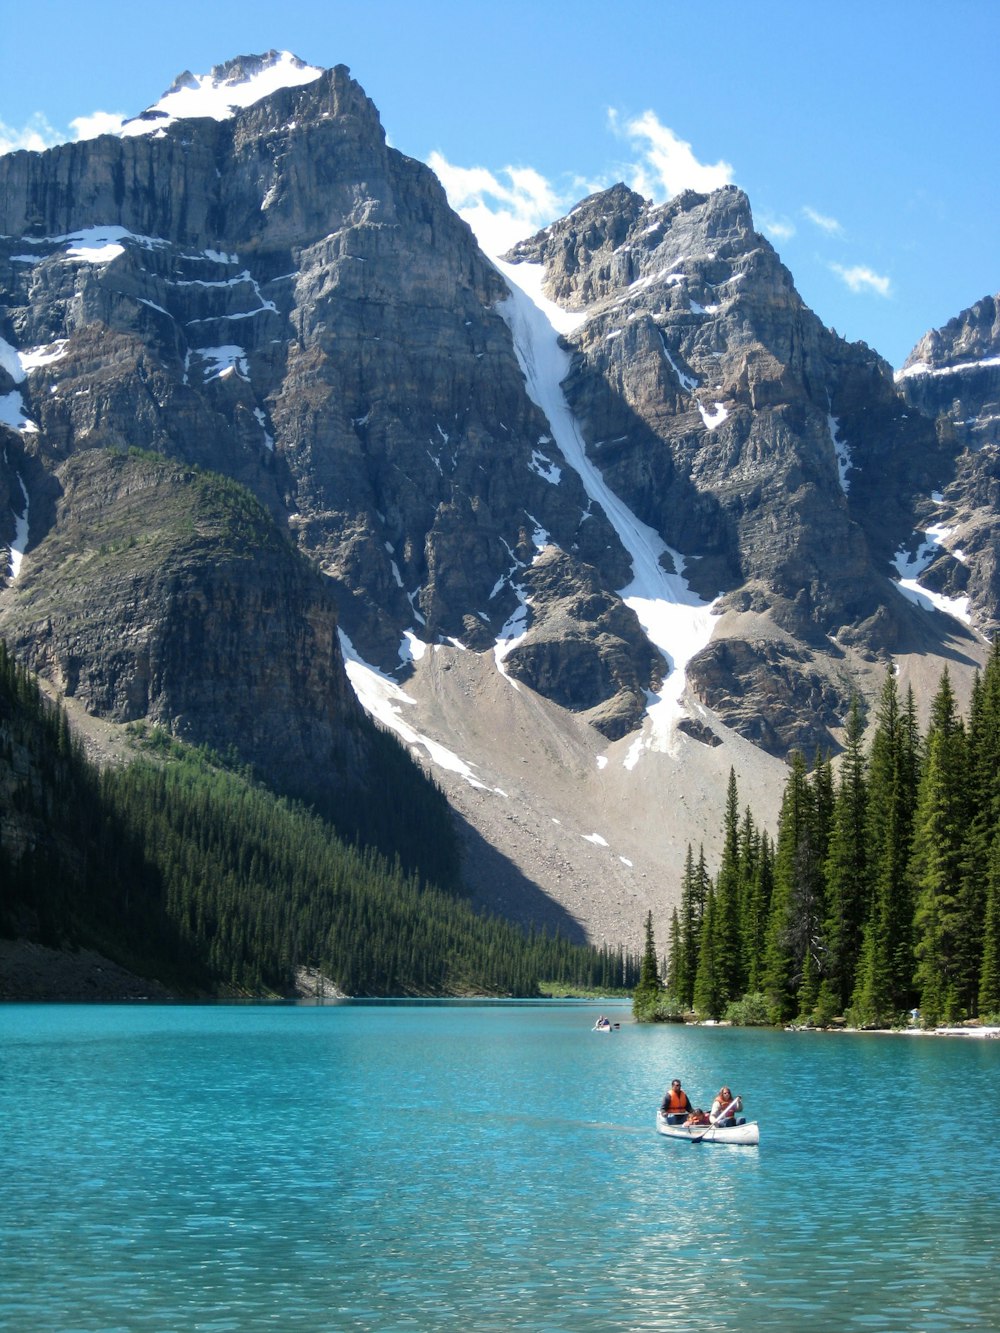 two people in a small boat on a mountain lake